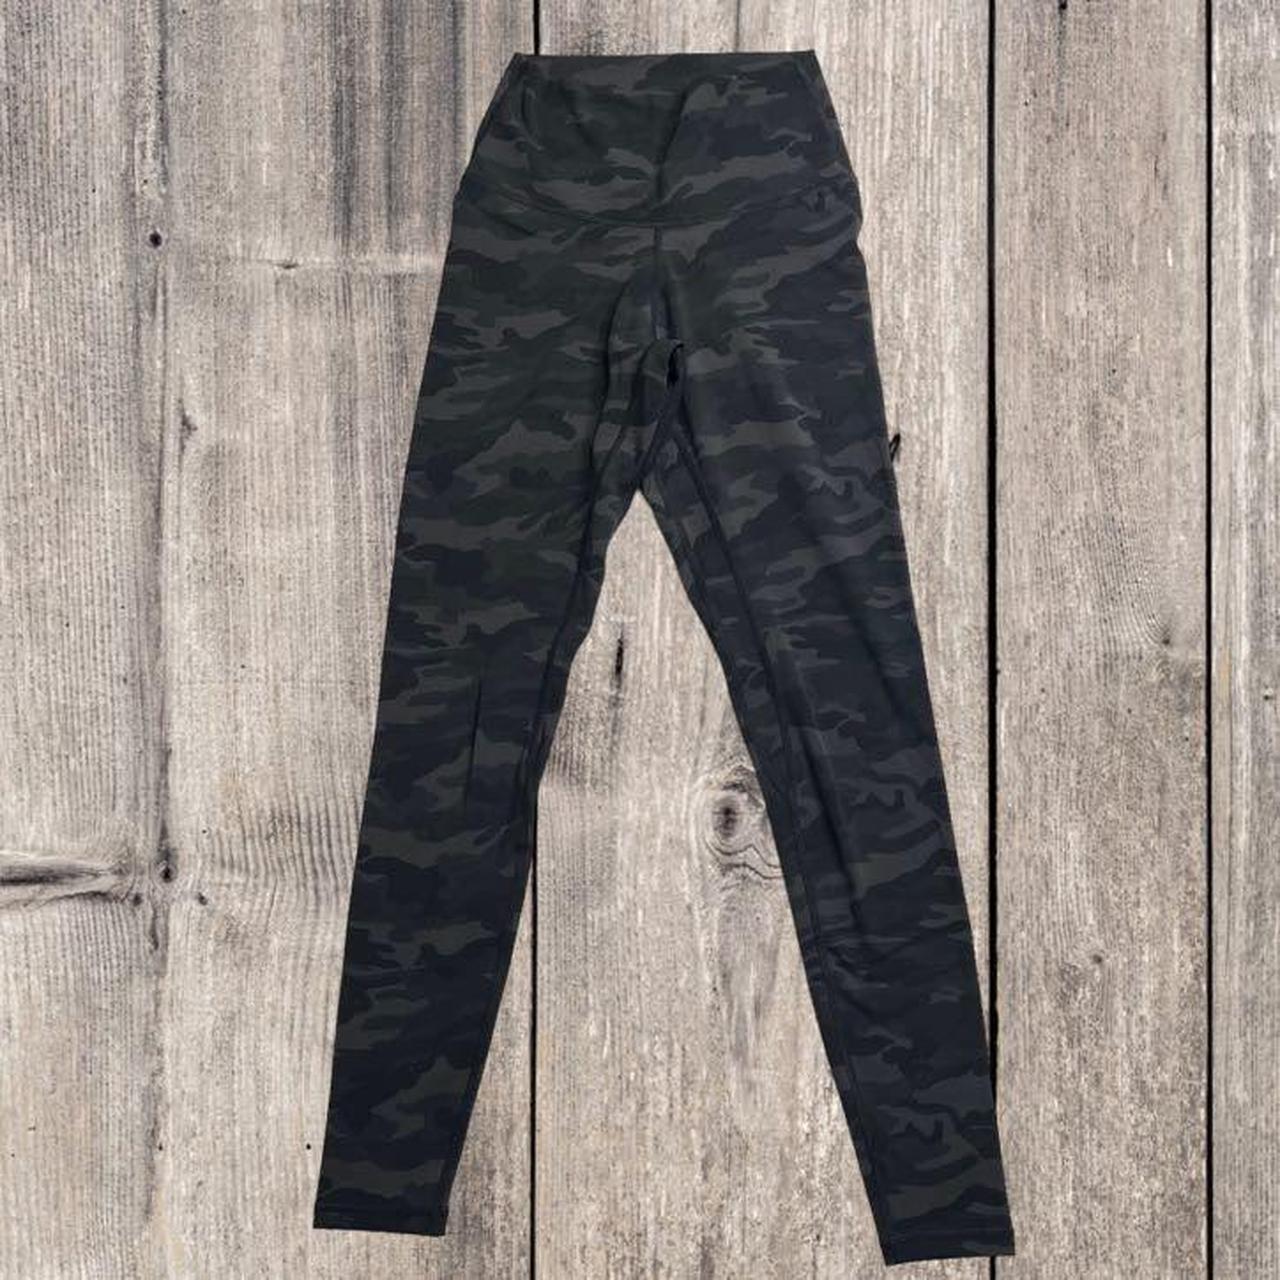 Fit Review Colorfulkoala Women's High Waisted Leggings in Camo